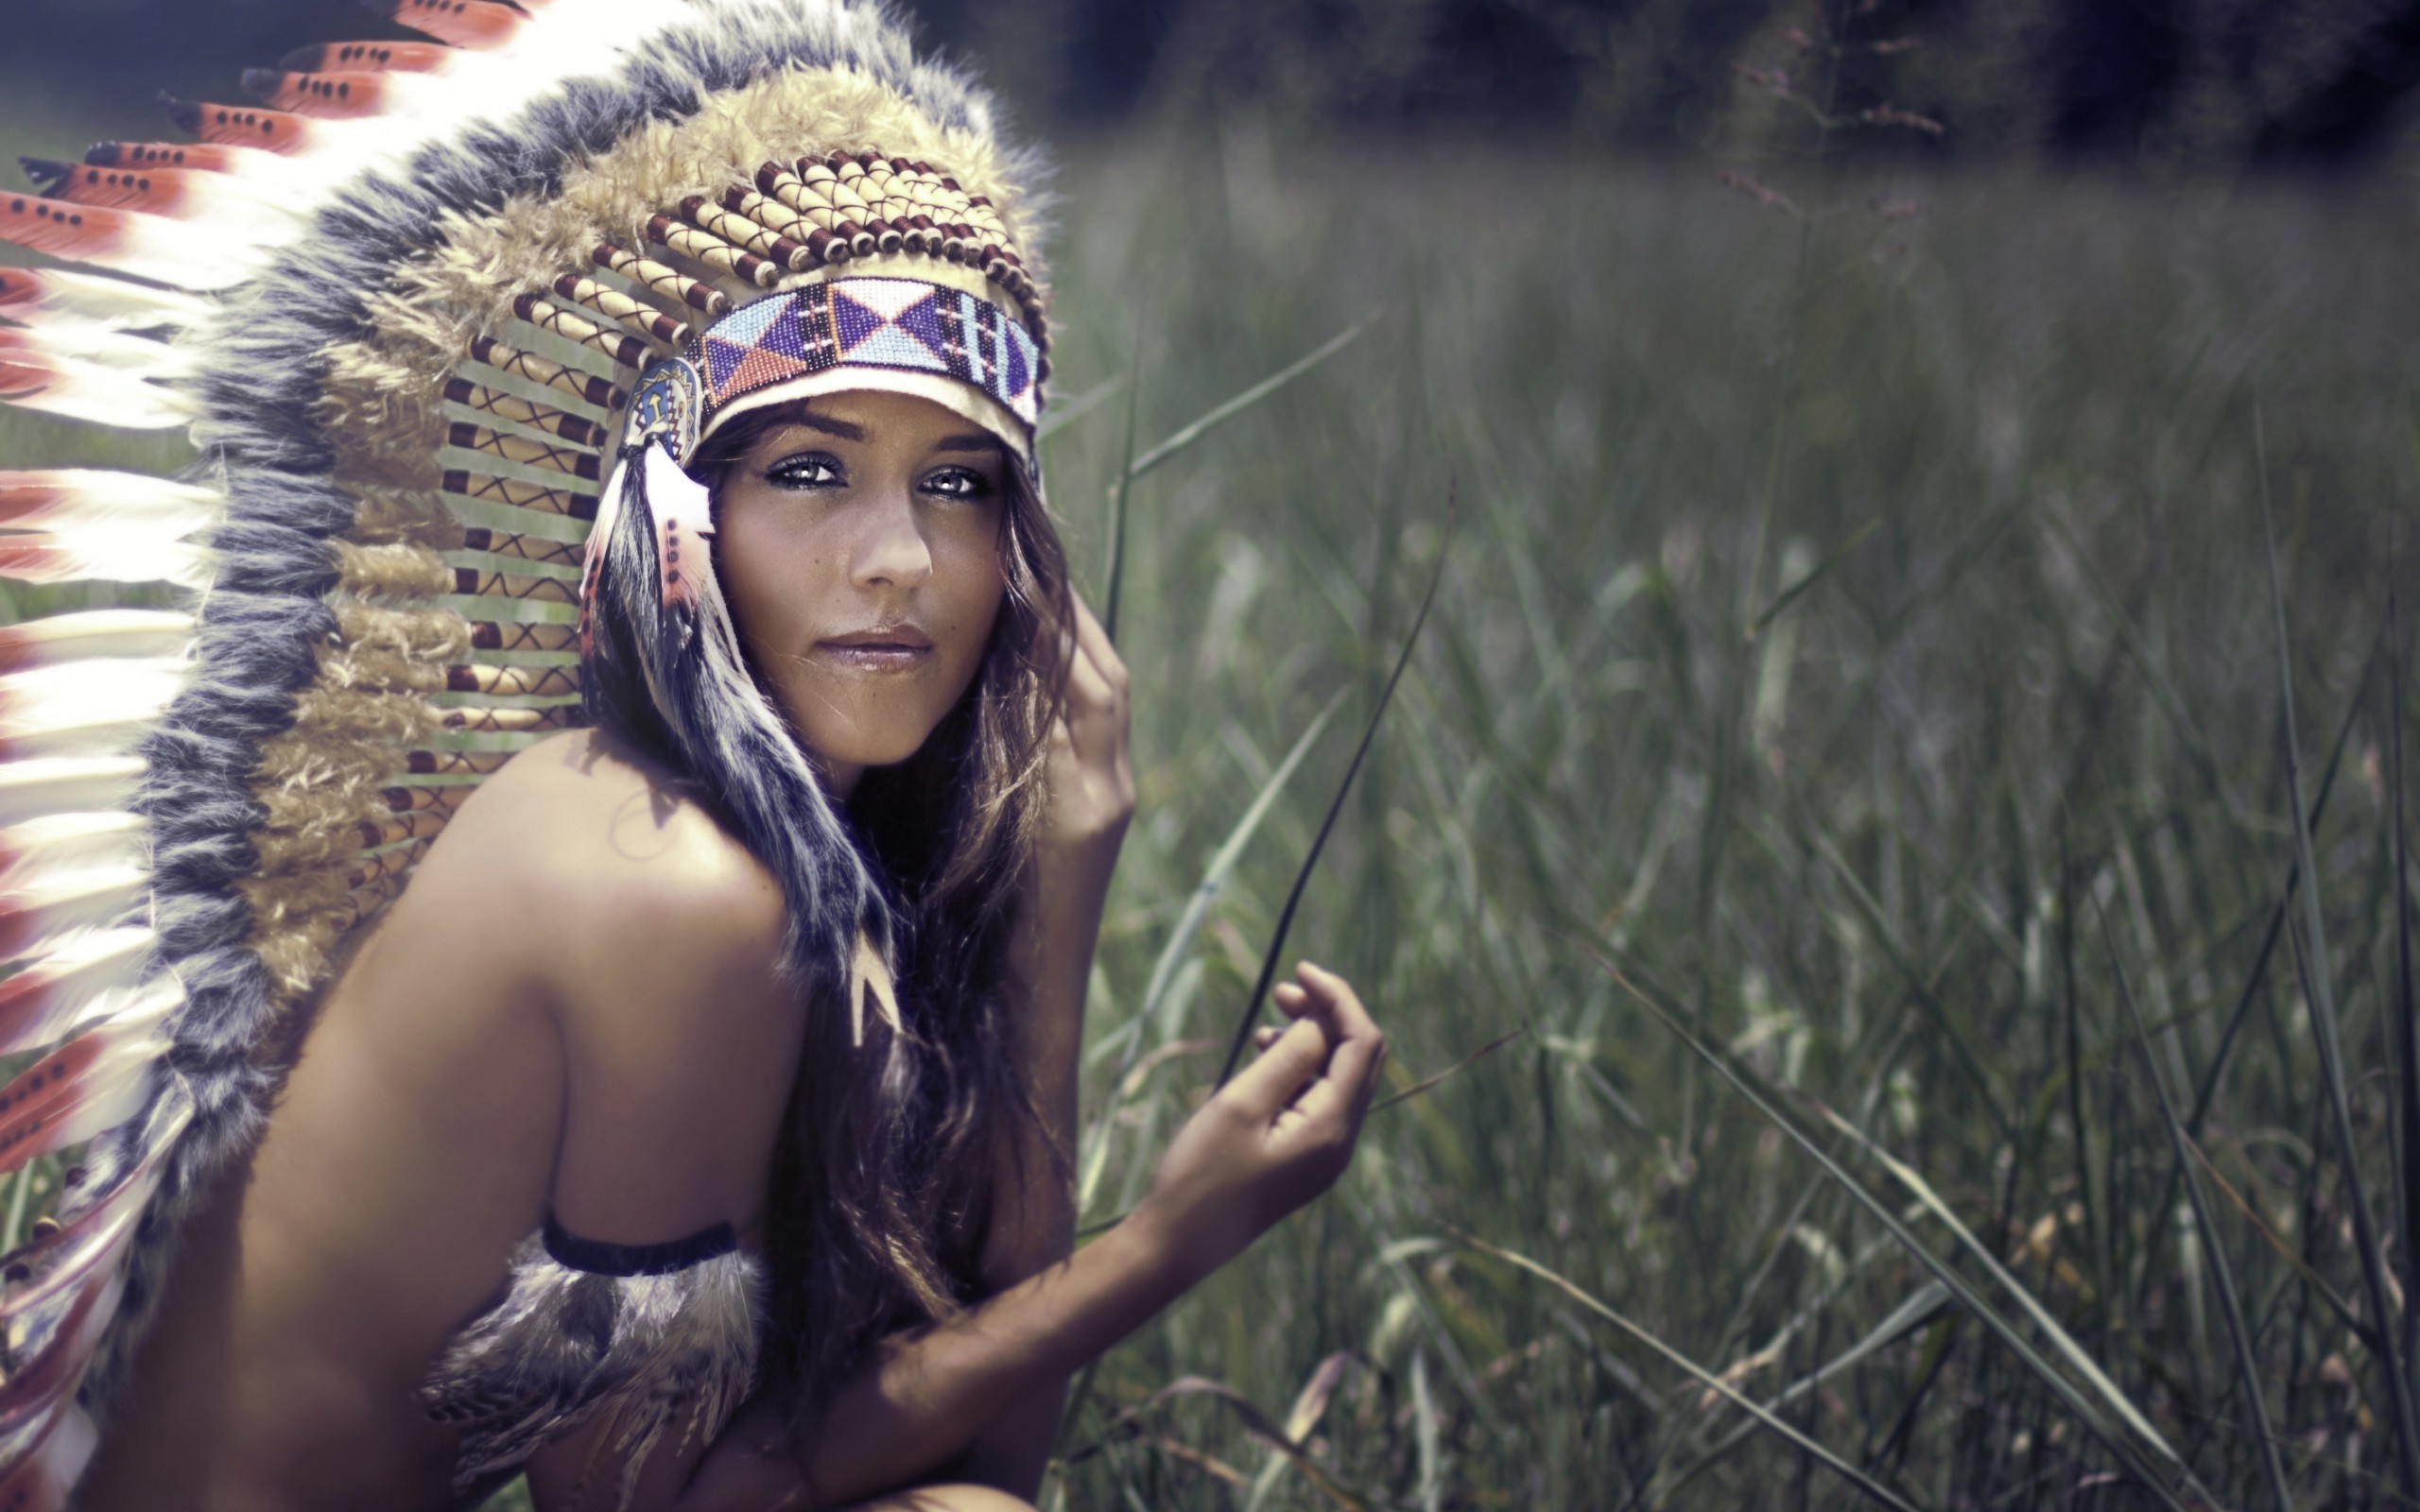 People 2560x1600 women women outdoors headdress field strategic covering no bra looking at viewer sacrilege model plants face outdoors